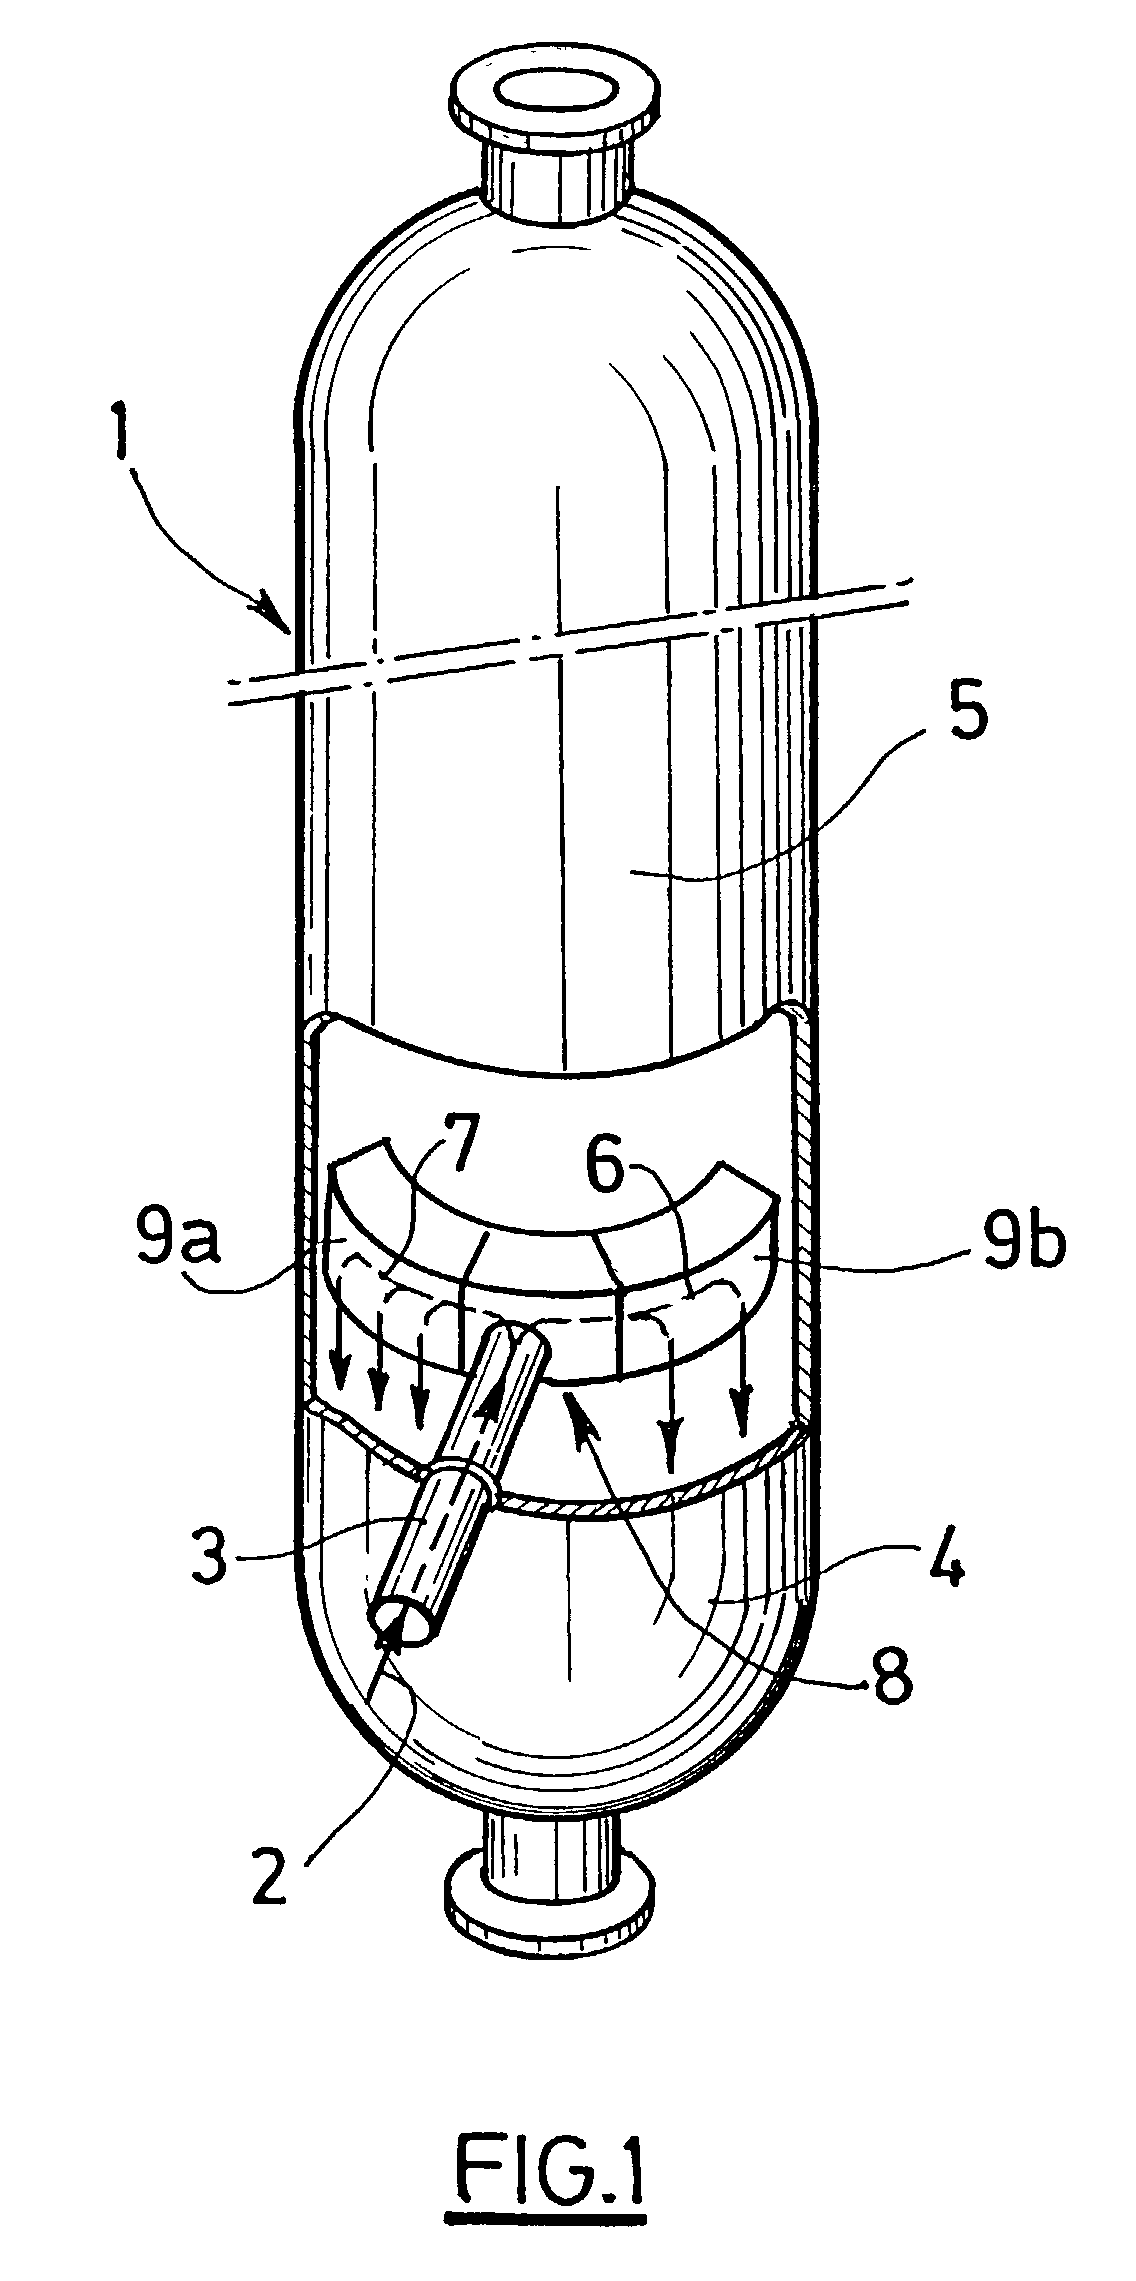 Method and device for introducing a liquid-vapor mixture into a radial feed cylindrical fractionating column